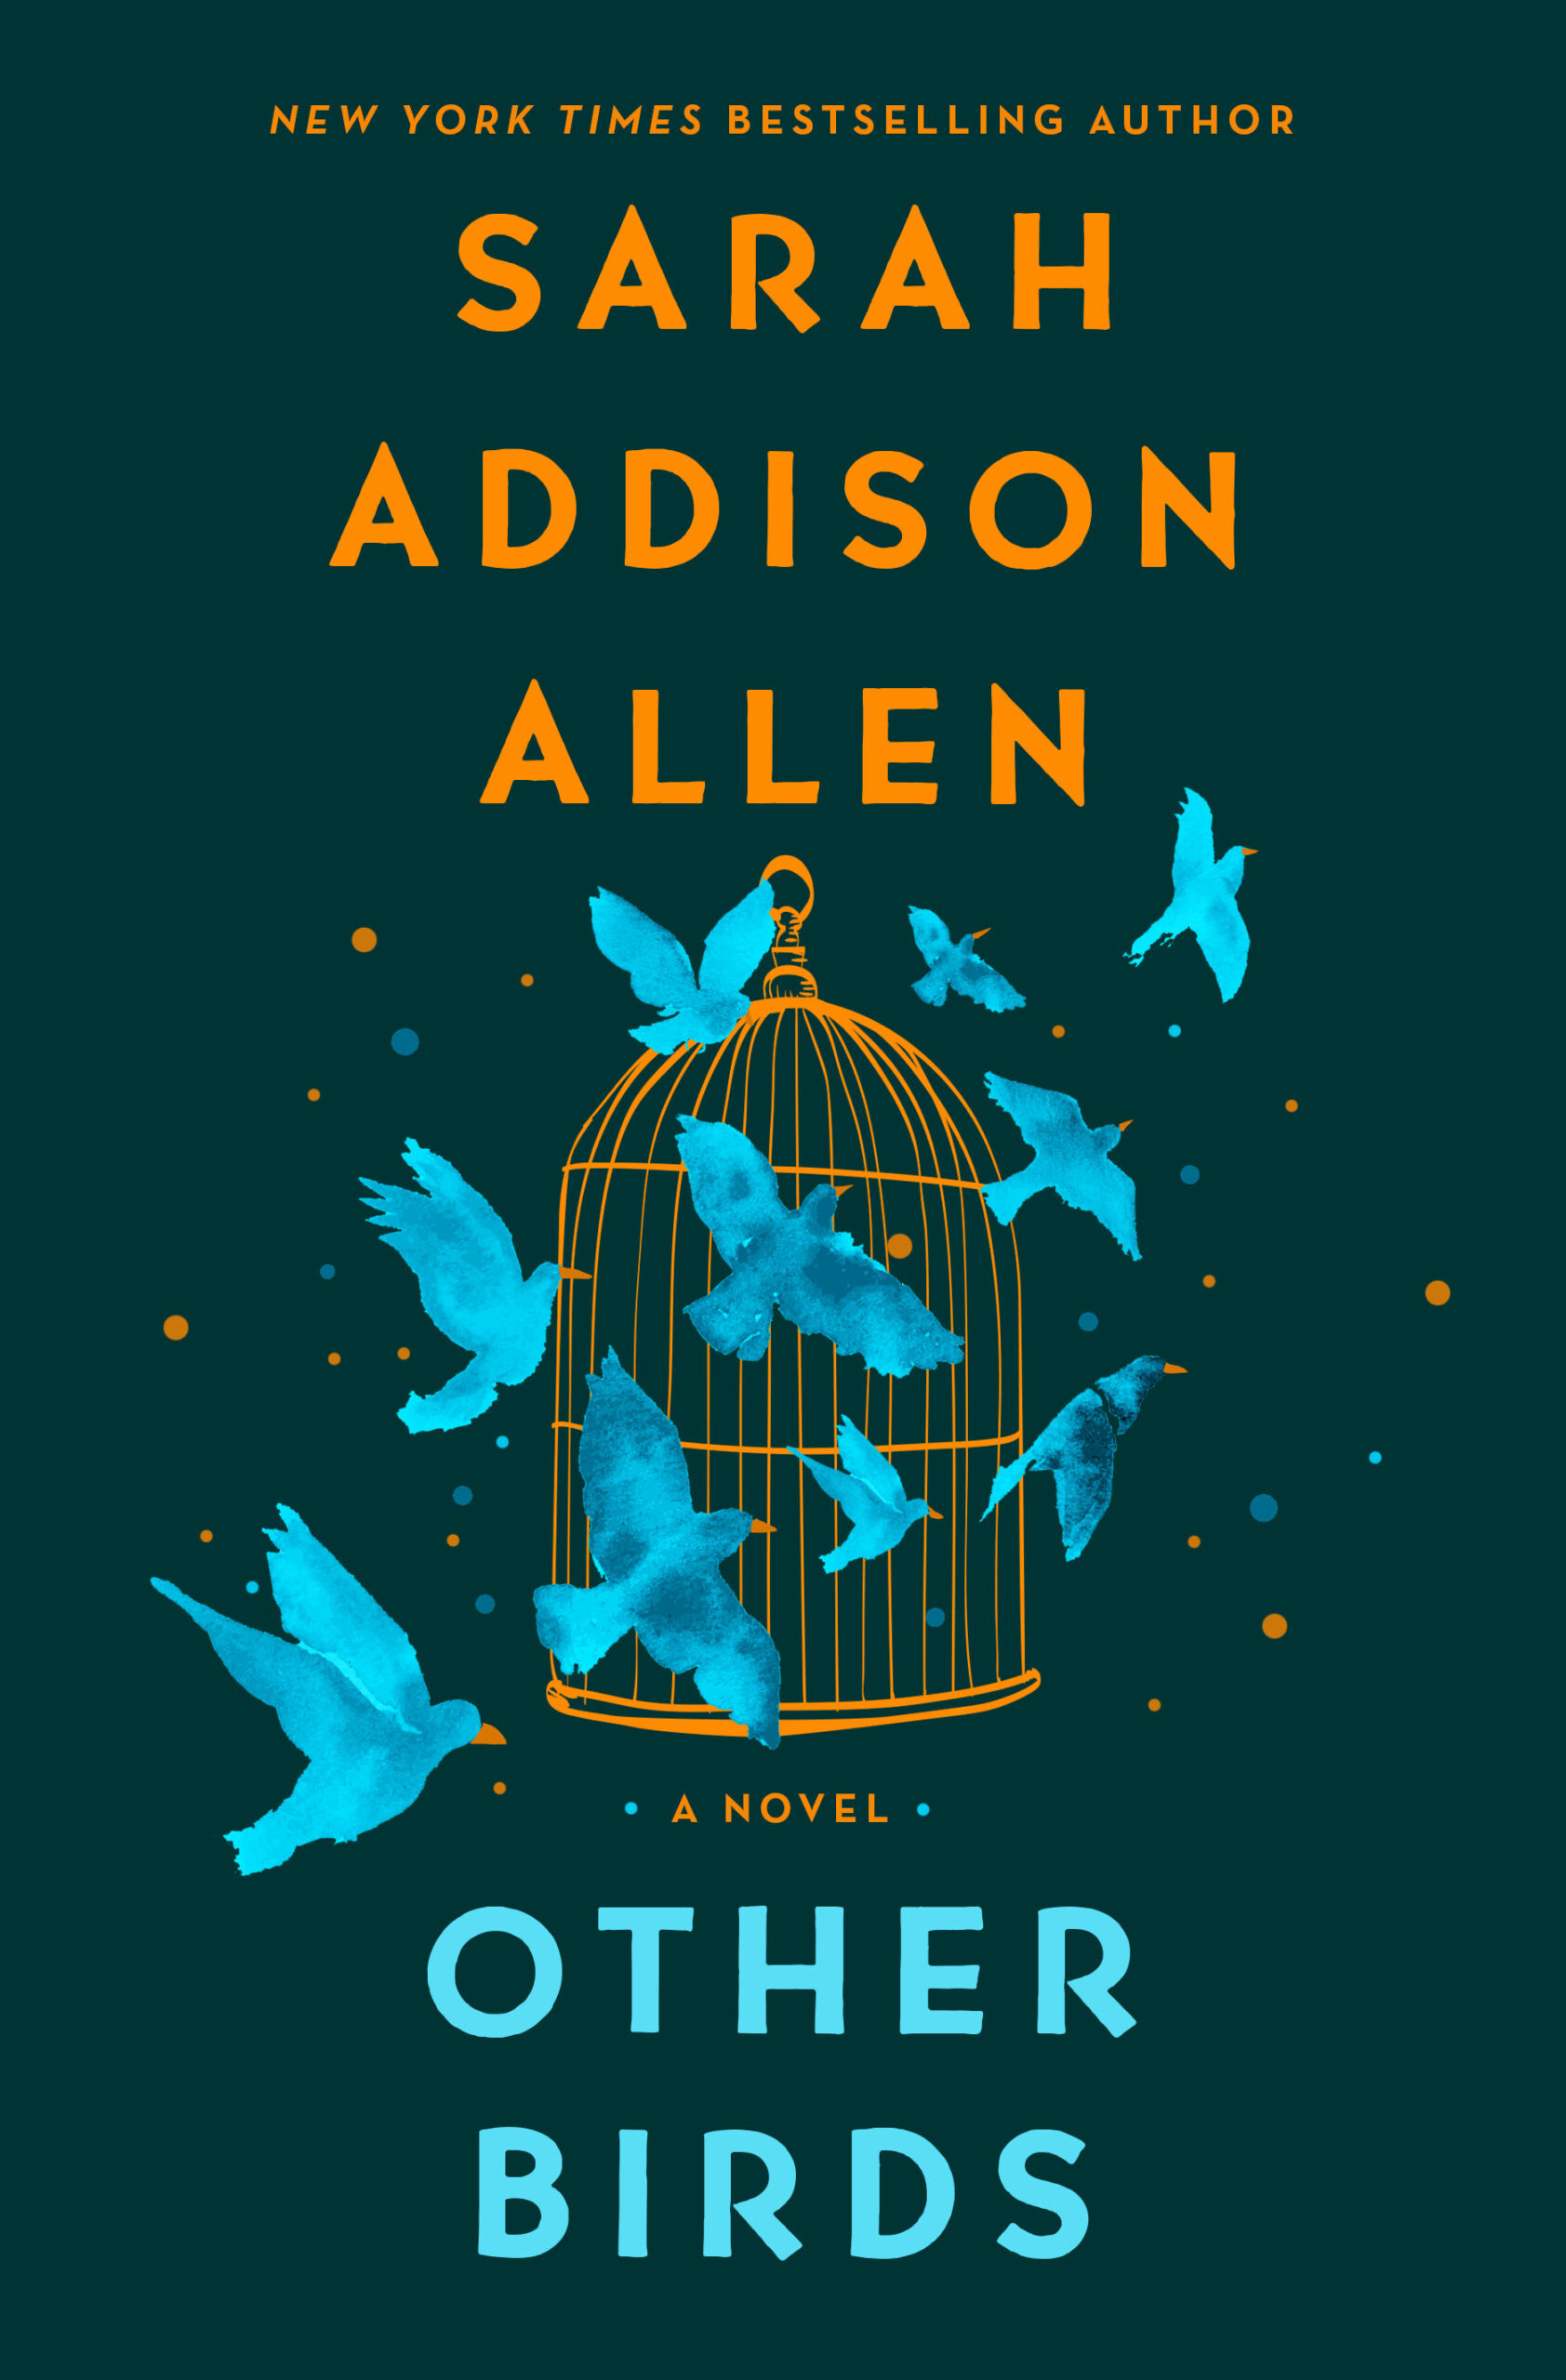 Other birds book cover